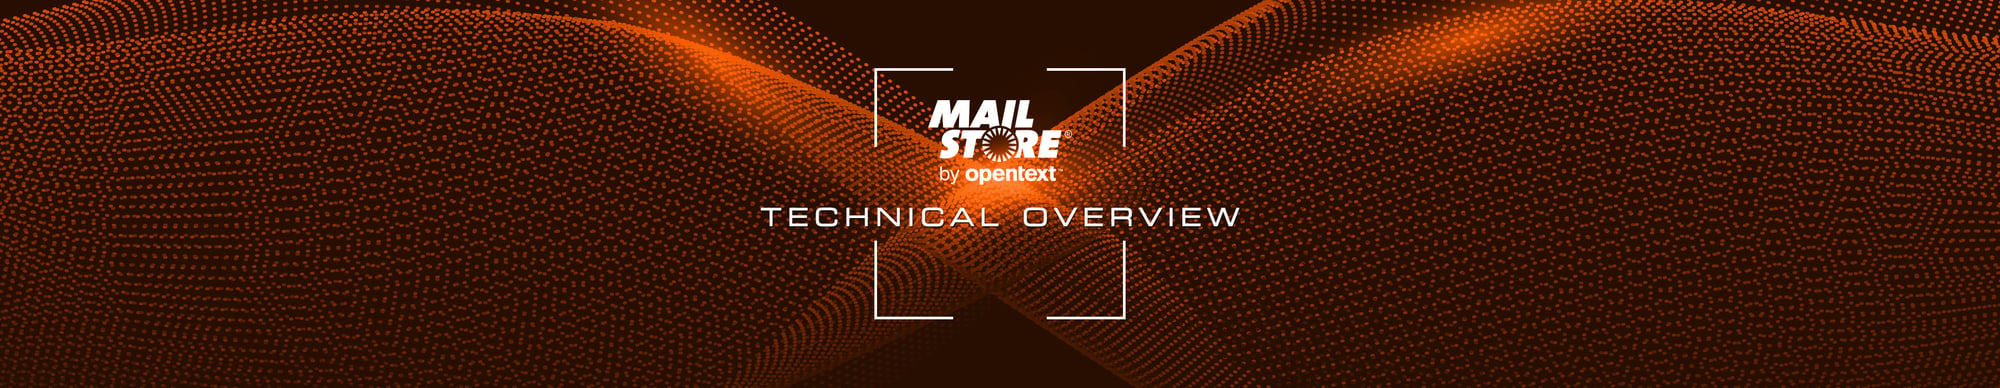 MailStore Technical Overview